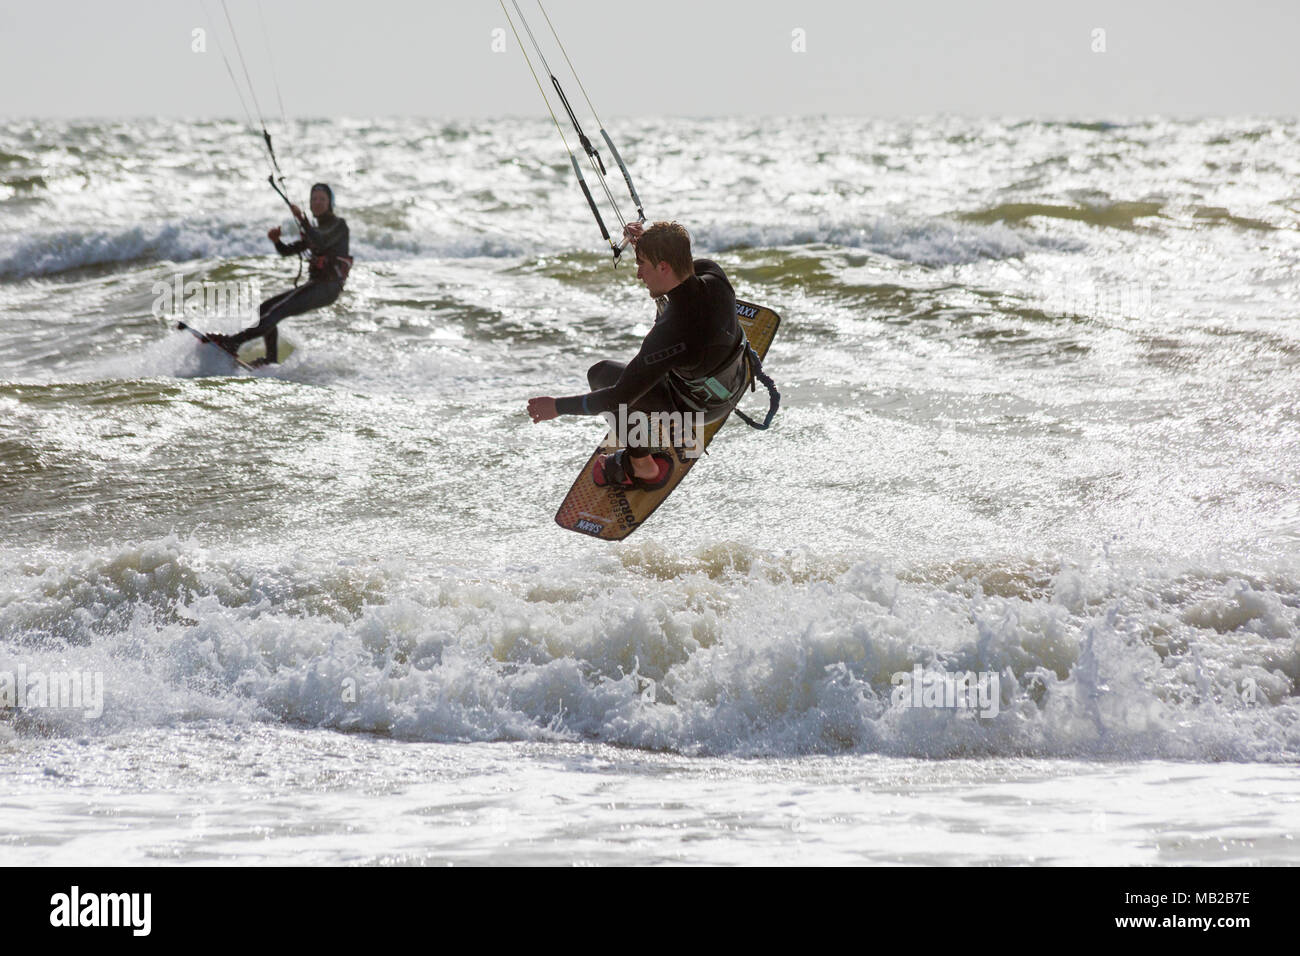 Sandbanks, Poole, Dorset, UK. 6th April, 2018. UK weather: breezy day at Sandbanks as kite surfers make the most of the windy conditions to get high in the air, airborne. kitesurfers kite surfers kite surfer kiteboarders kite boarders kitesurfer kitesurfing kite surfing kiteboarding kite boarding kiteboarder kite boarder Stock Photo